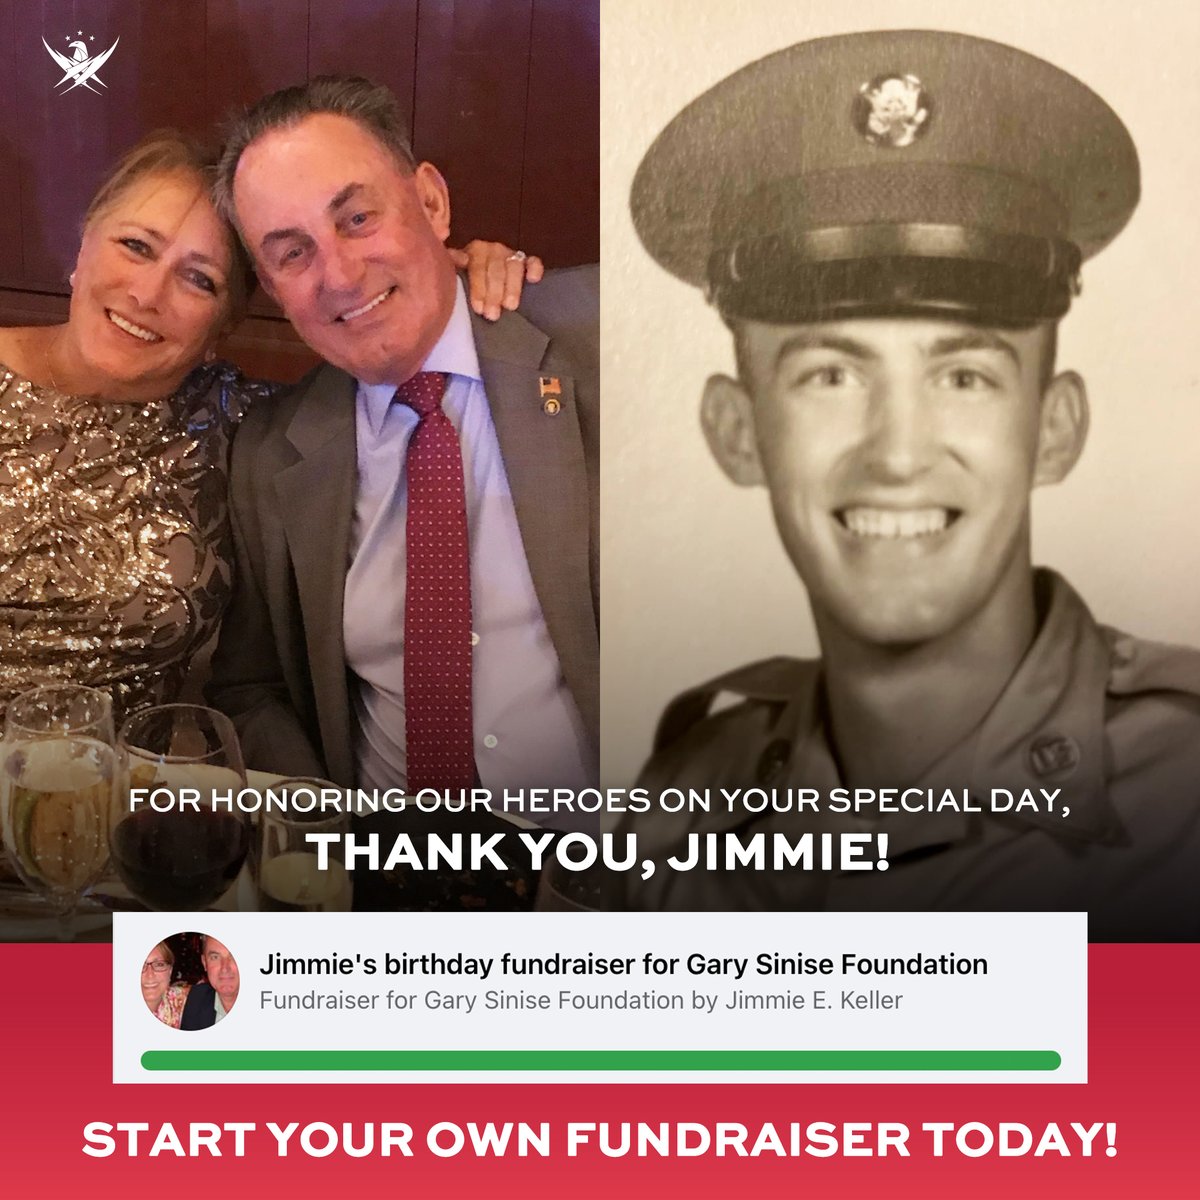 On #FundraiserFriday, we shine a light on U.S. Army Veteran Jimmie E. Keller, who created a birthday fundraiser on Facebook! Selfless moments like this by our supporters mean so much to us and @GarySinise. Start your own GSF fundraiser: bit.ly/48ShGVJ